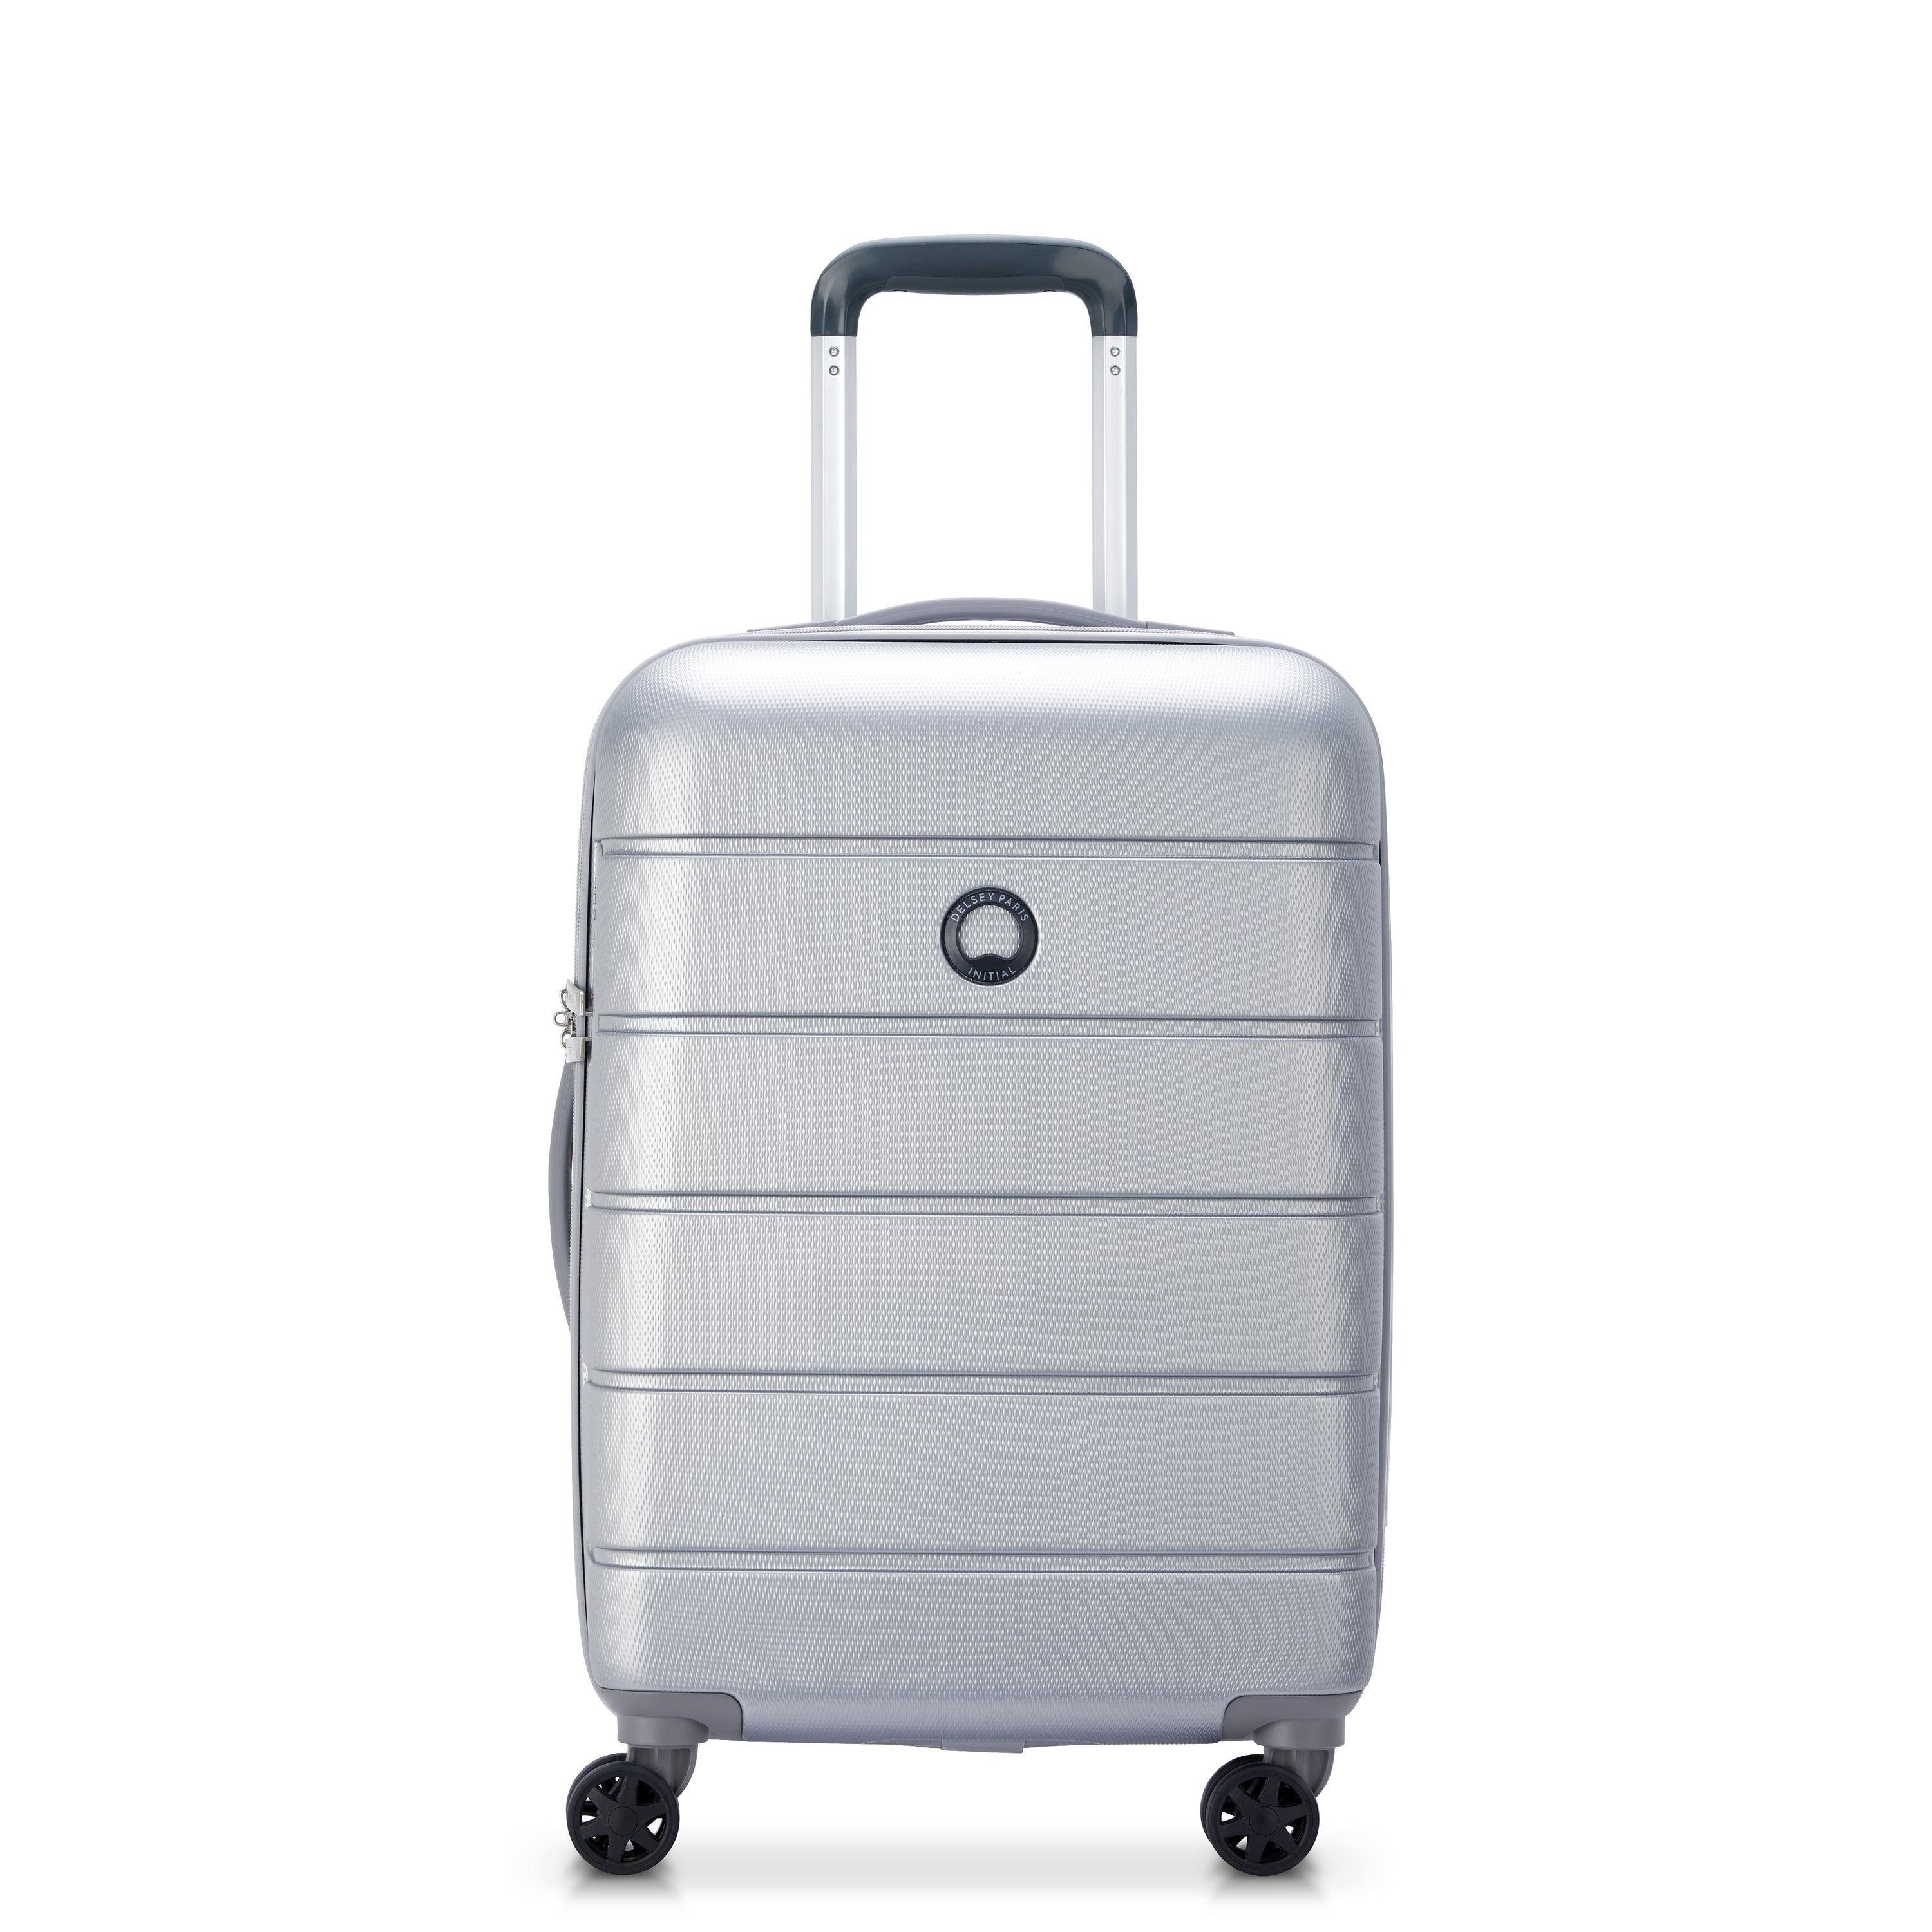 Delsey Lagos 55cm Hardcase Expandable 4 Double Wheel Cabin Luggage Trolley Case Silver - 00387080111W9 